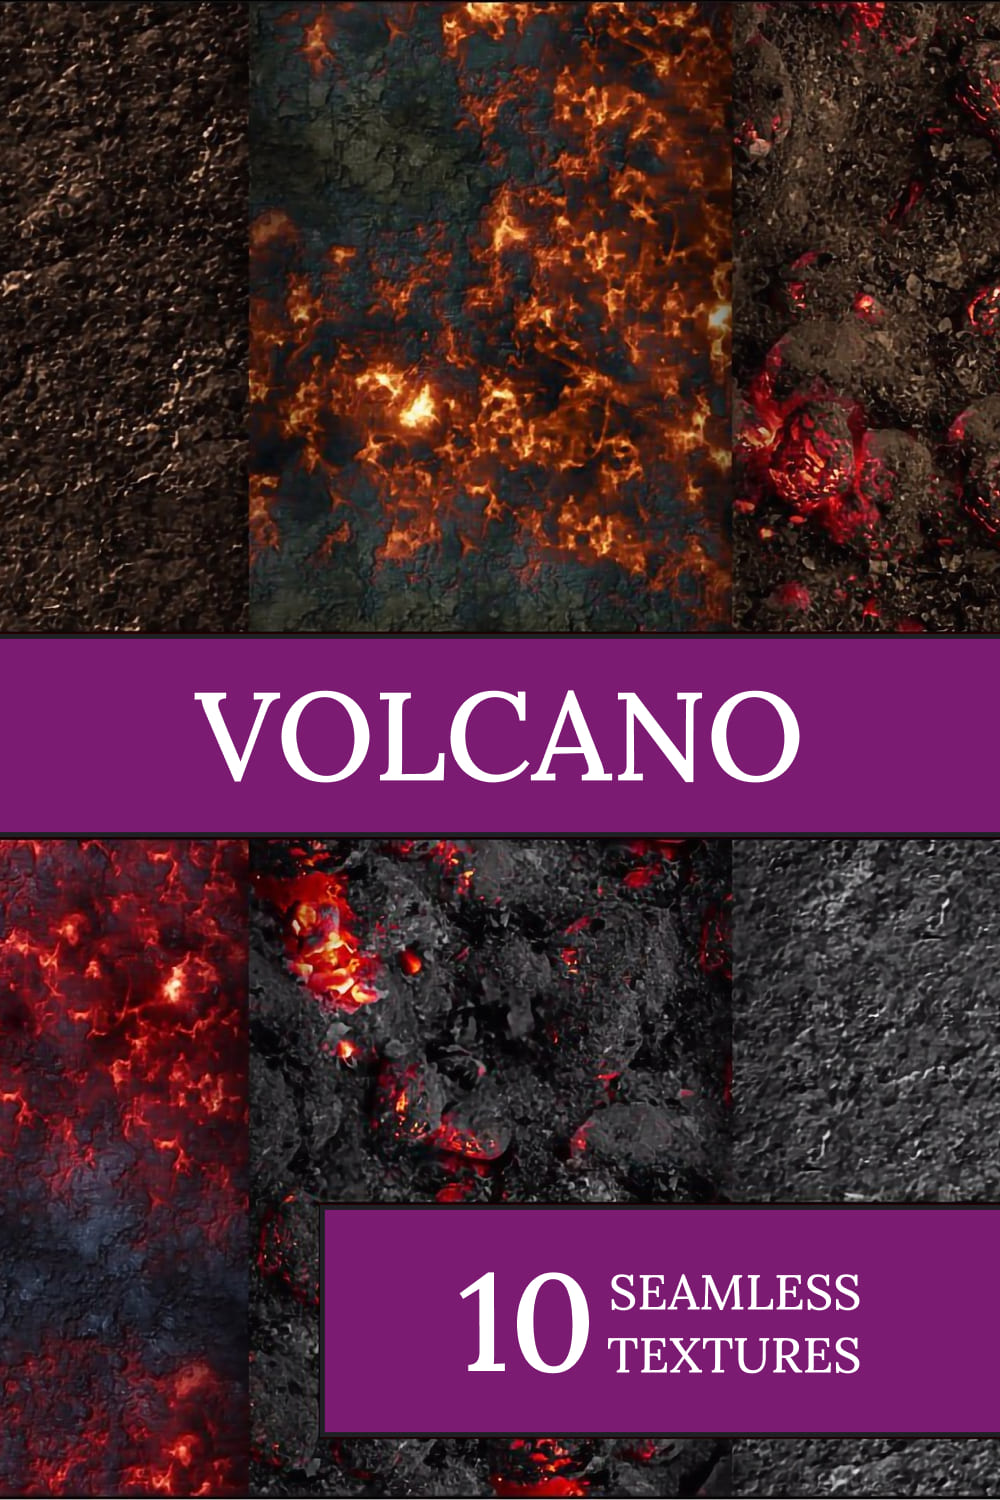 Volcano 10 Seamless Textures - pinterest image preview.